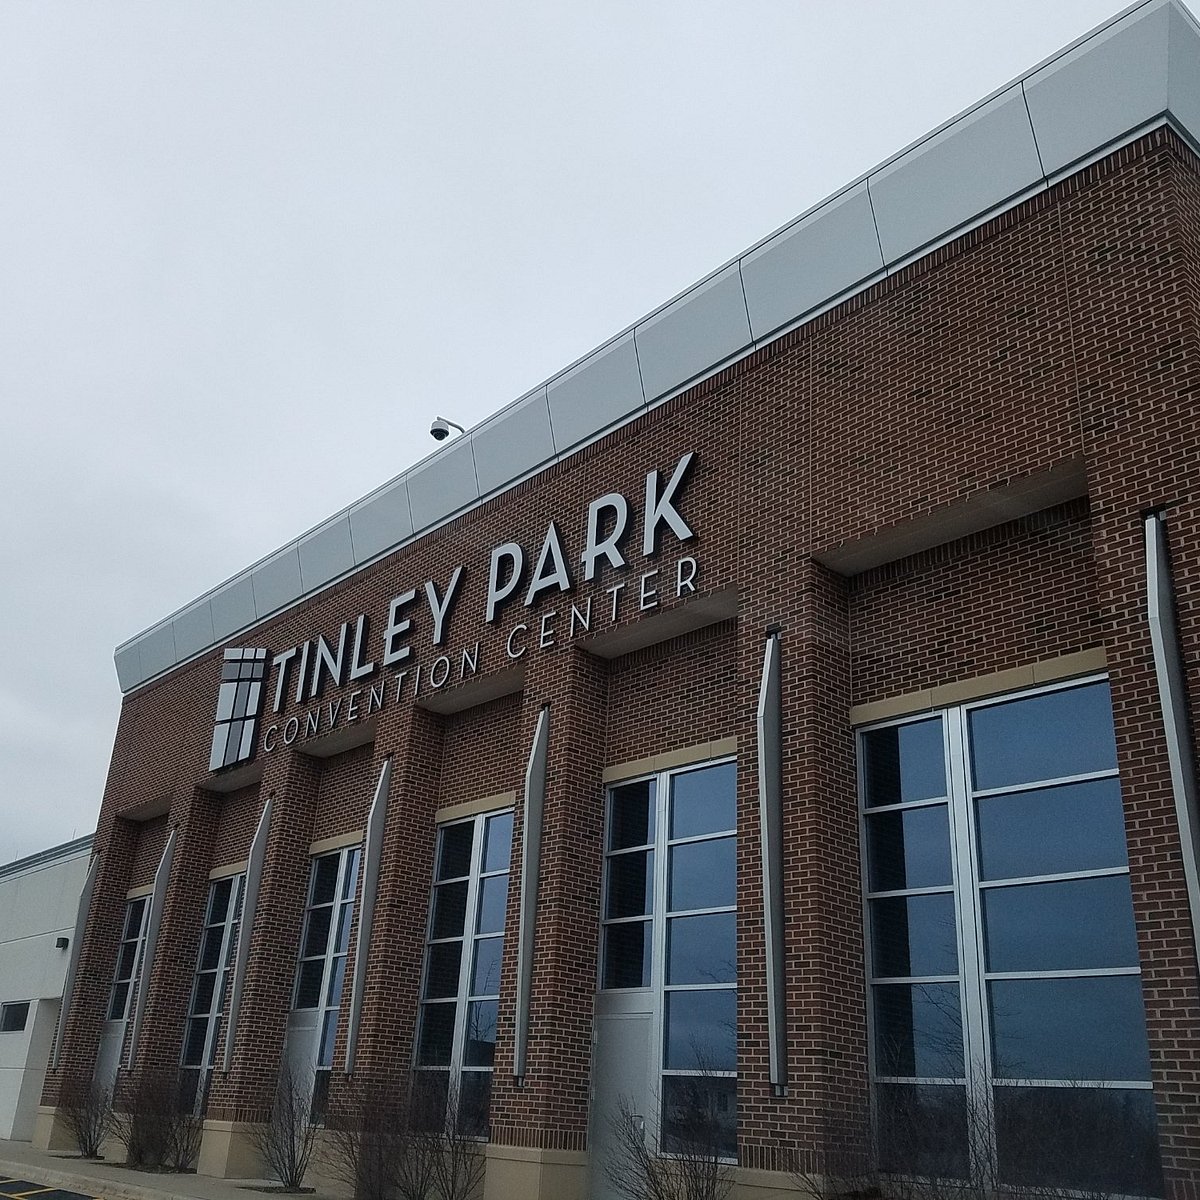 TINLEY PARK CONVENTION CENTER 2022 What to Know BEFORE You Go